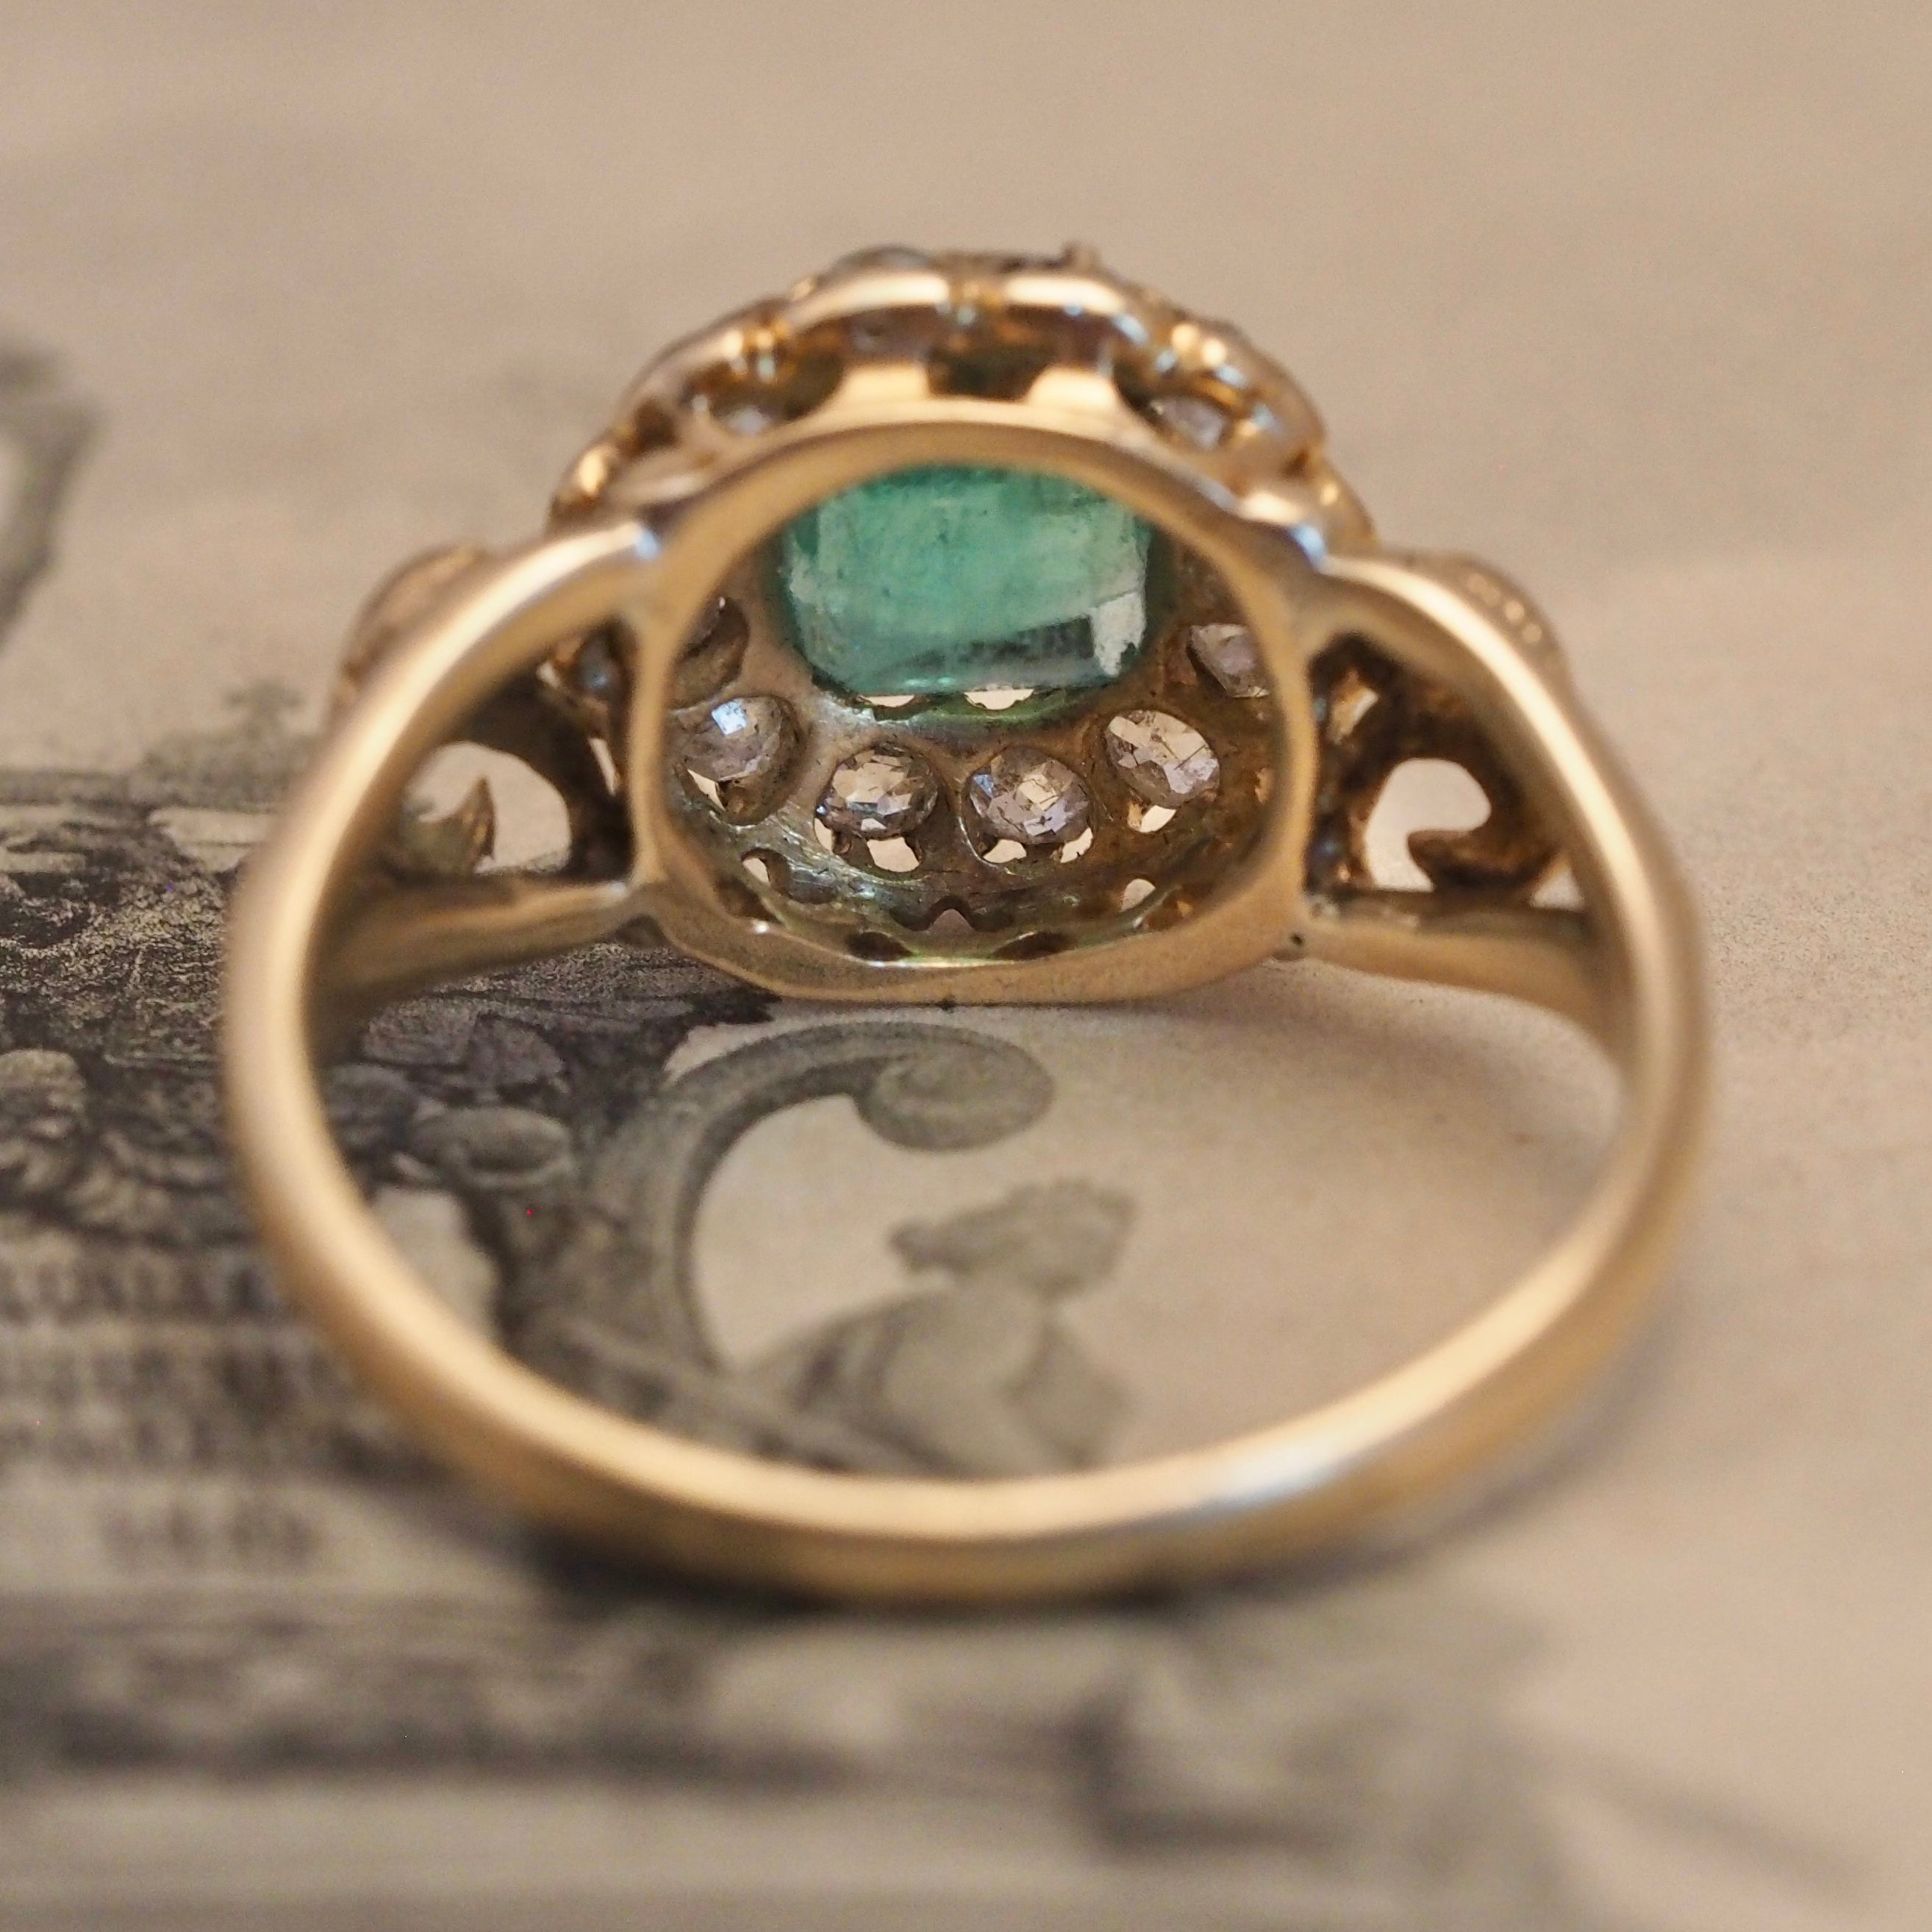 Antique Victorian 14k Gold Emerald and Old Mine Cut Diamond Halo Ring